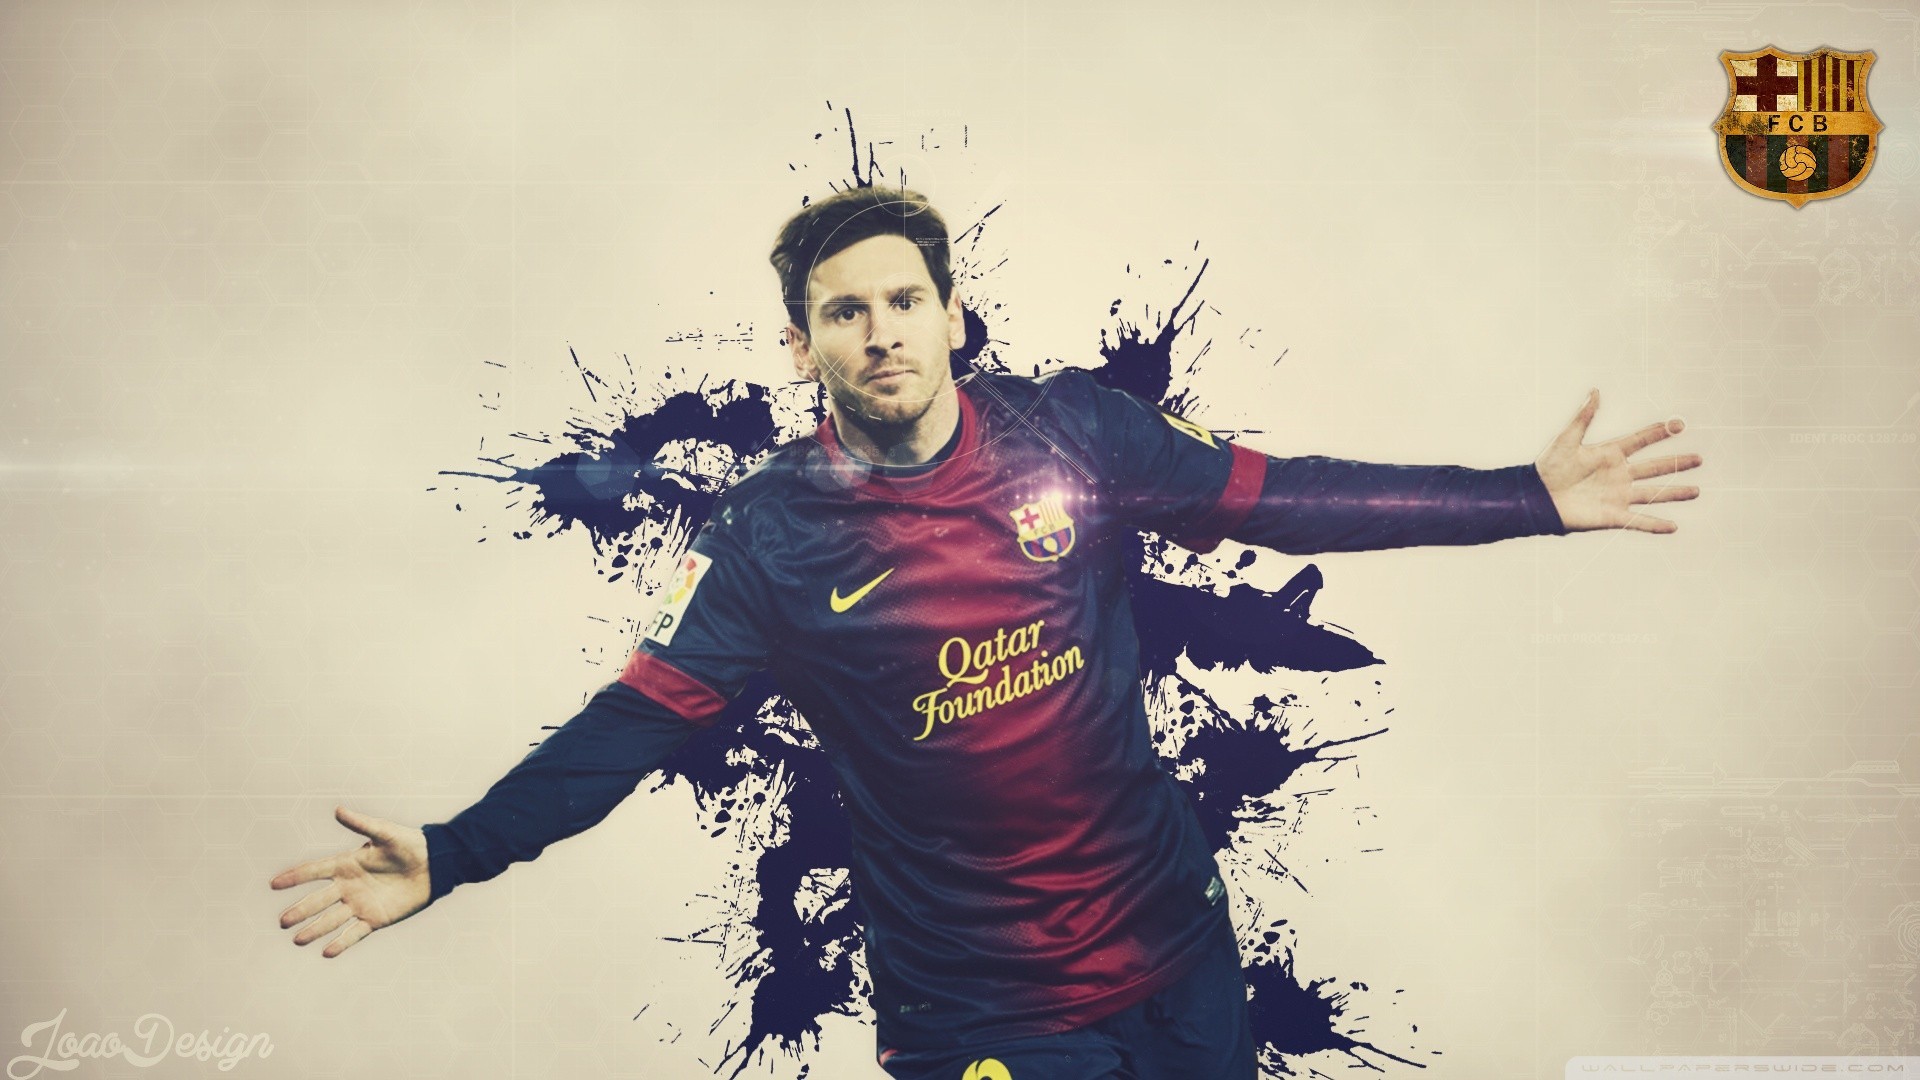 Windows Wallpaper Messi With Resolution 1920X1080 pixel. You can make this wallpaper for your Mac or Windows Desktop Background, iPhone, Android or Tablet and another Smartphone device for free